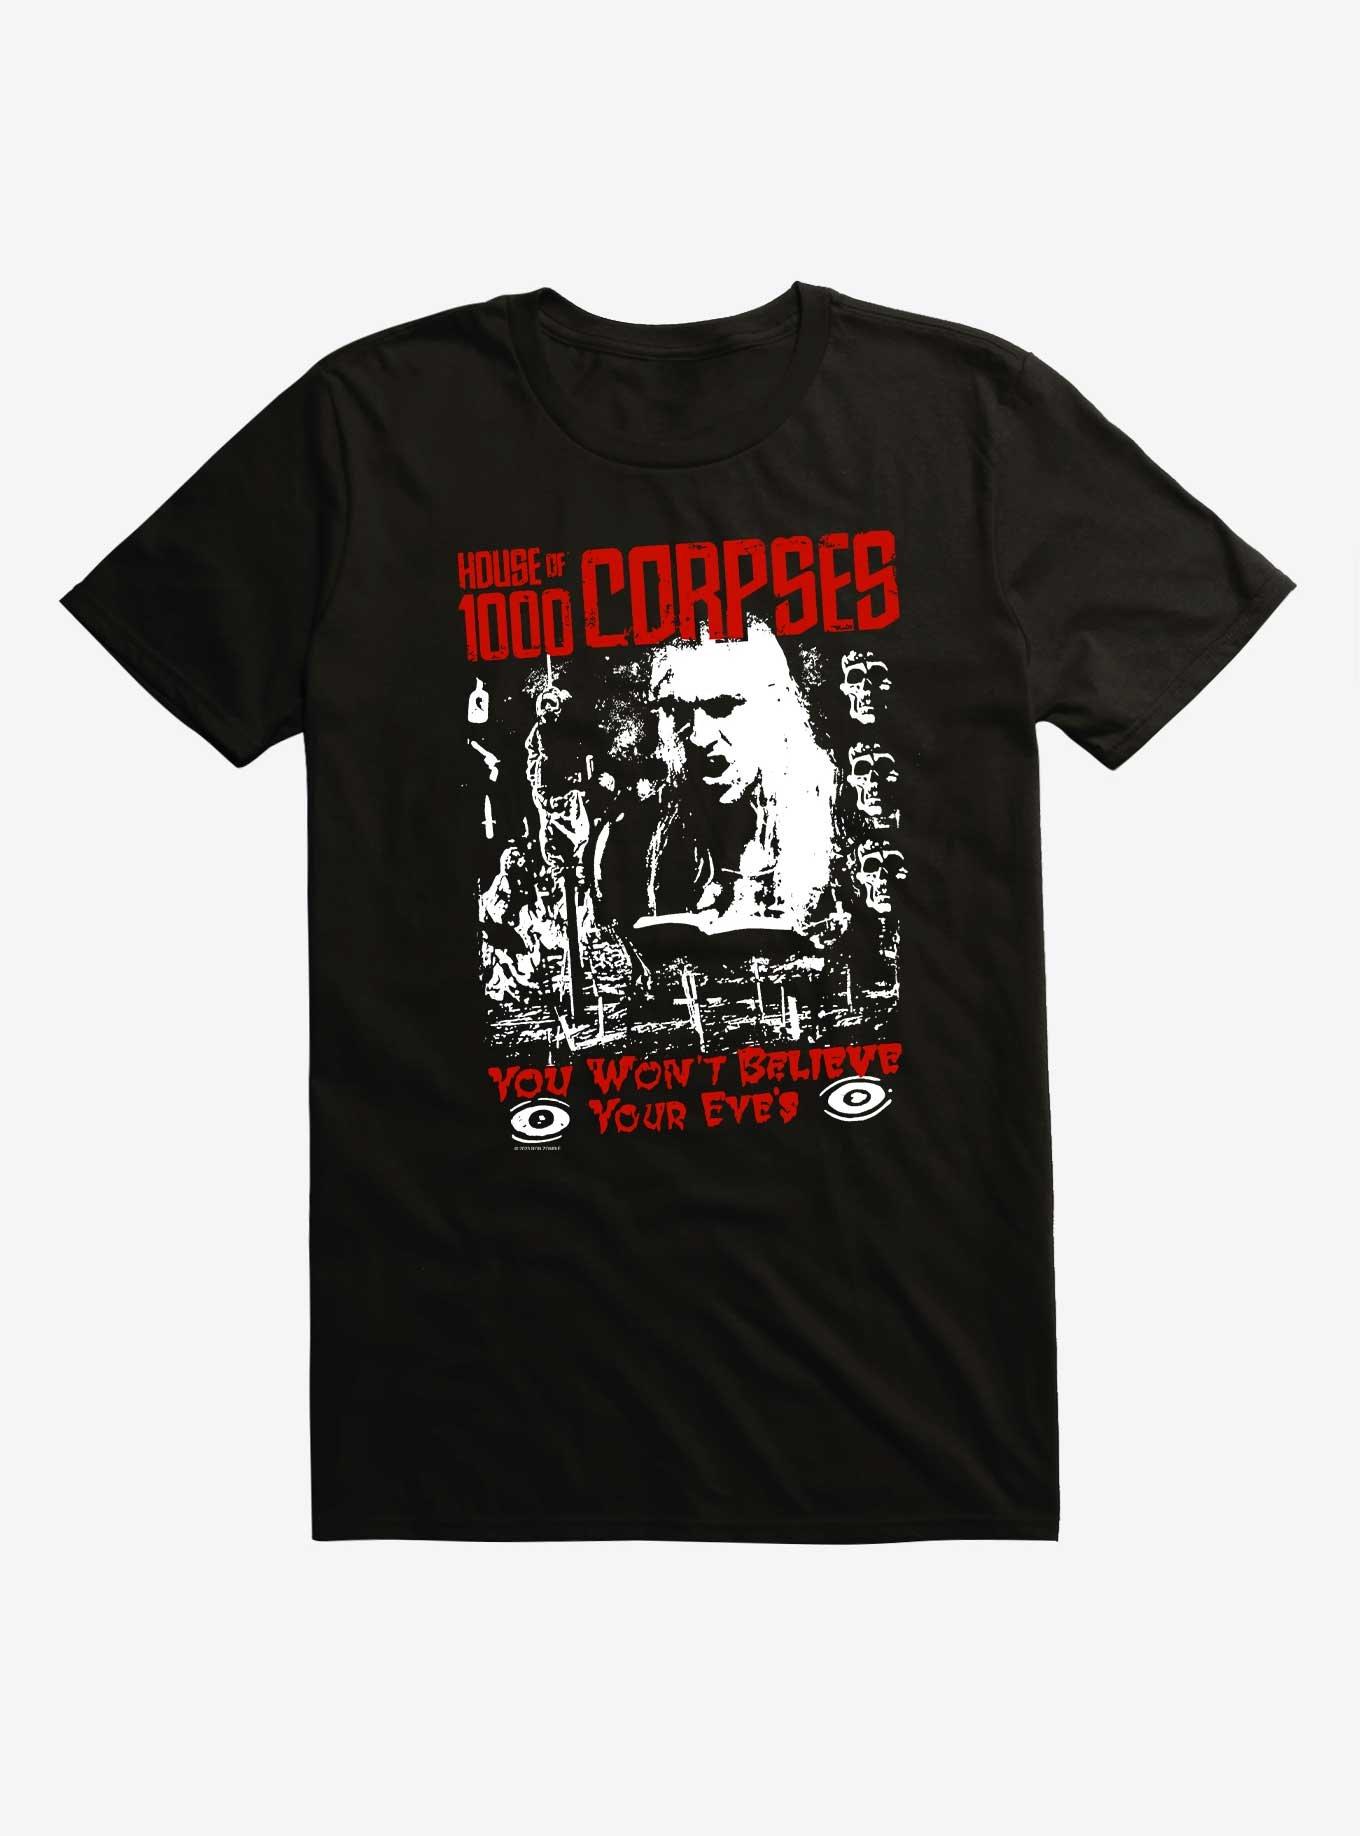 House Of 1000 Corpses You Won't Believe Your Eyes T-Shirt